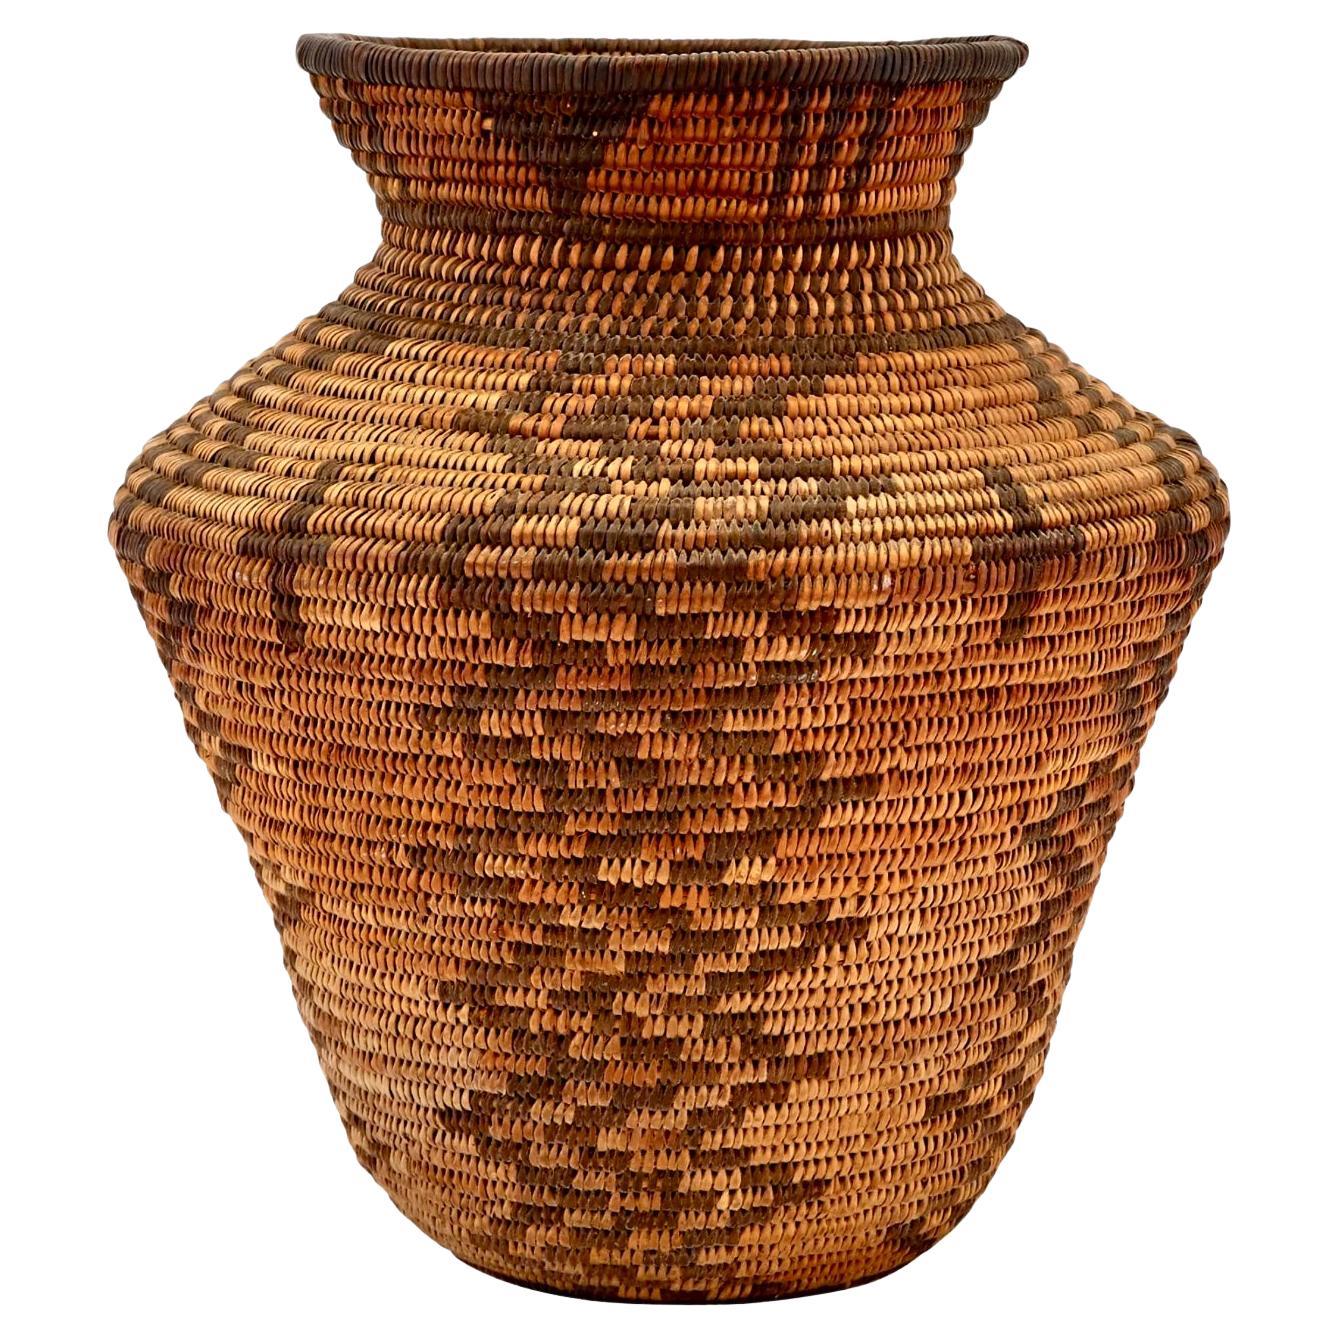 Early 20th century Native American Apache Olla in very good condition. This basket dates from the turn of the century and was made for self-use. A very tight example with a stunning design. Makes a great statement for any room as a piece of